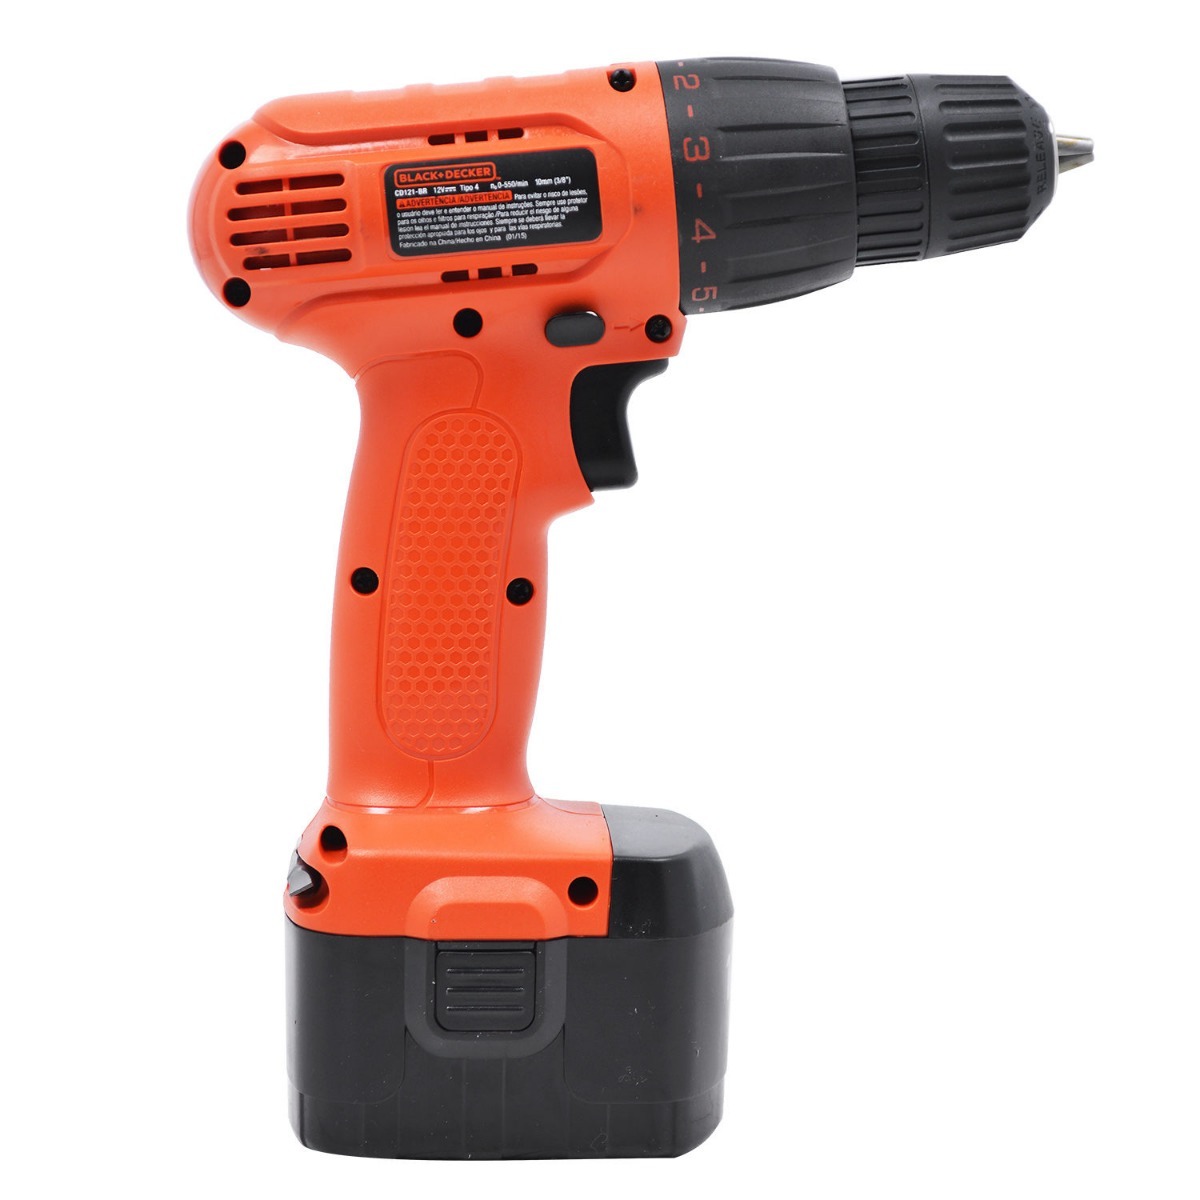 21+ frisch Fotos Black And Decker Eu : Black & Decker BDCDMT120 Review - Tool and Go : Sign up to get the latest news on products and promotions.